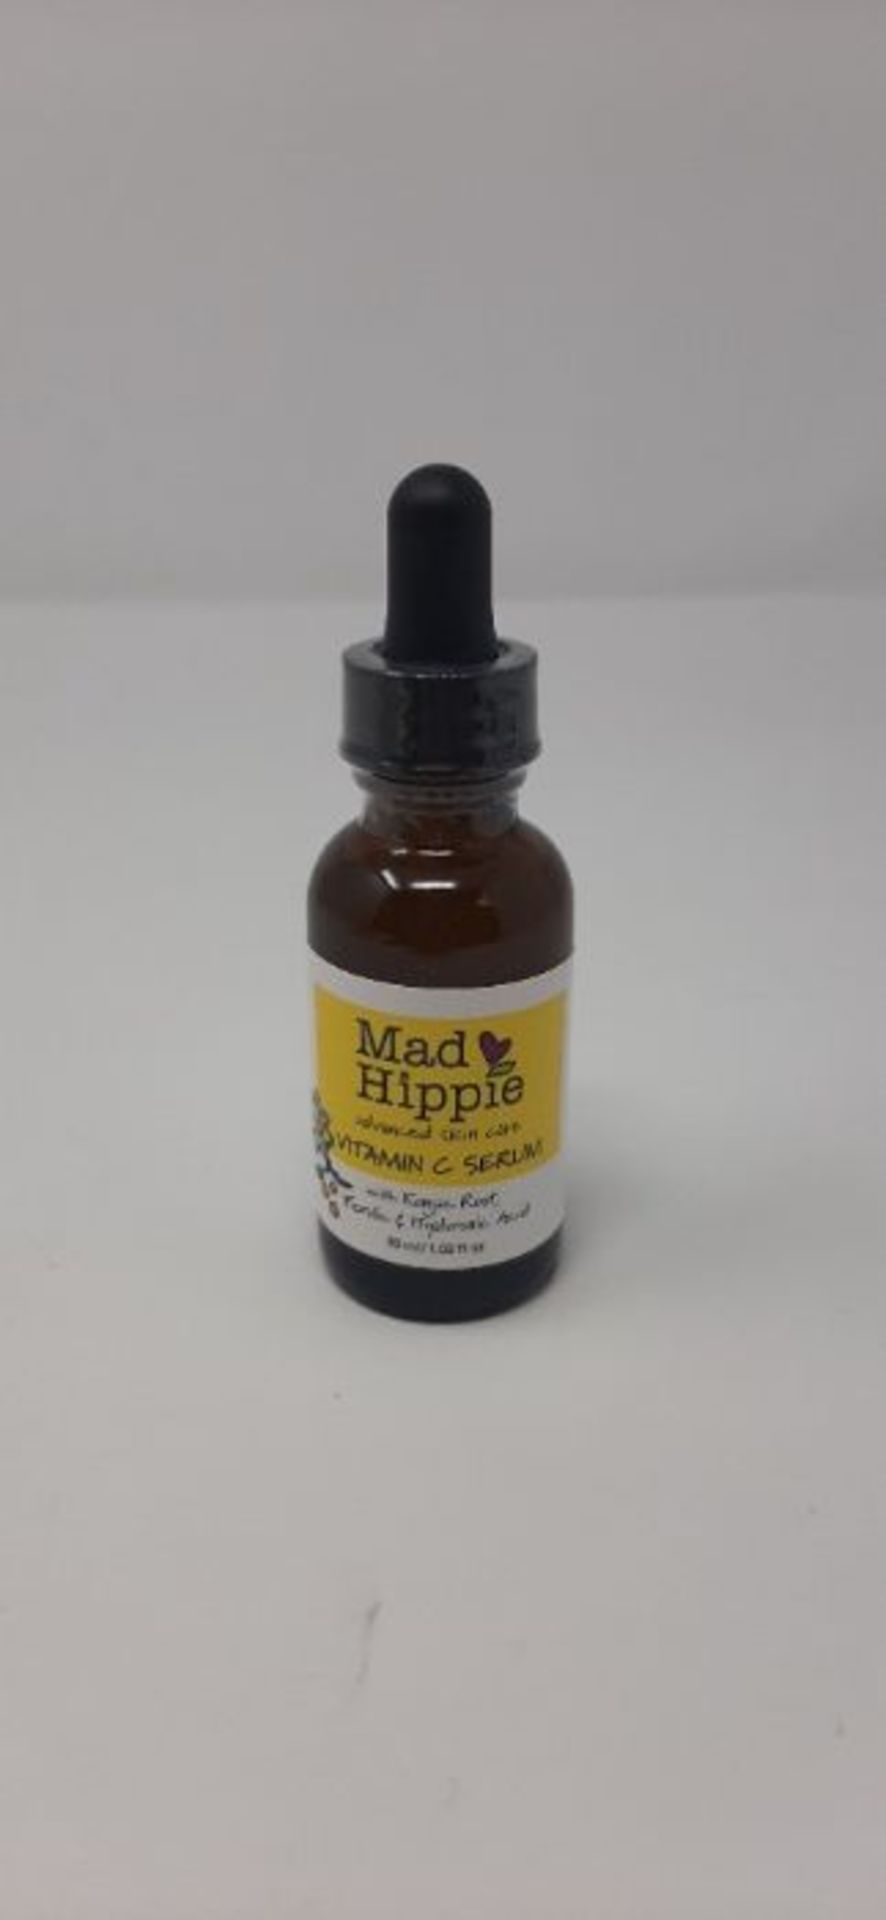 Mad Hippie Skin Care Products 1.02 Fluid Ounce Vitamin C Serum - Image 2 of 2